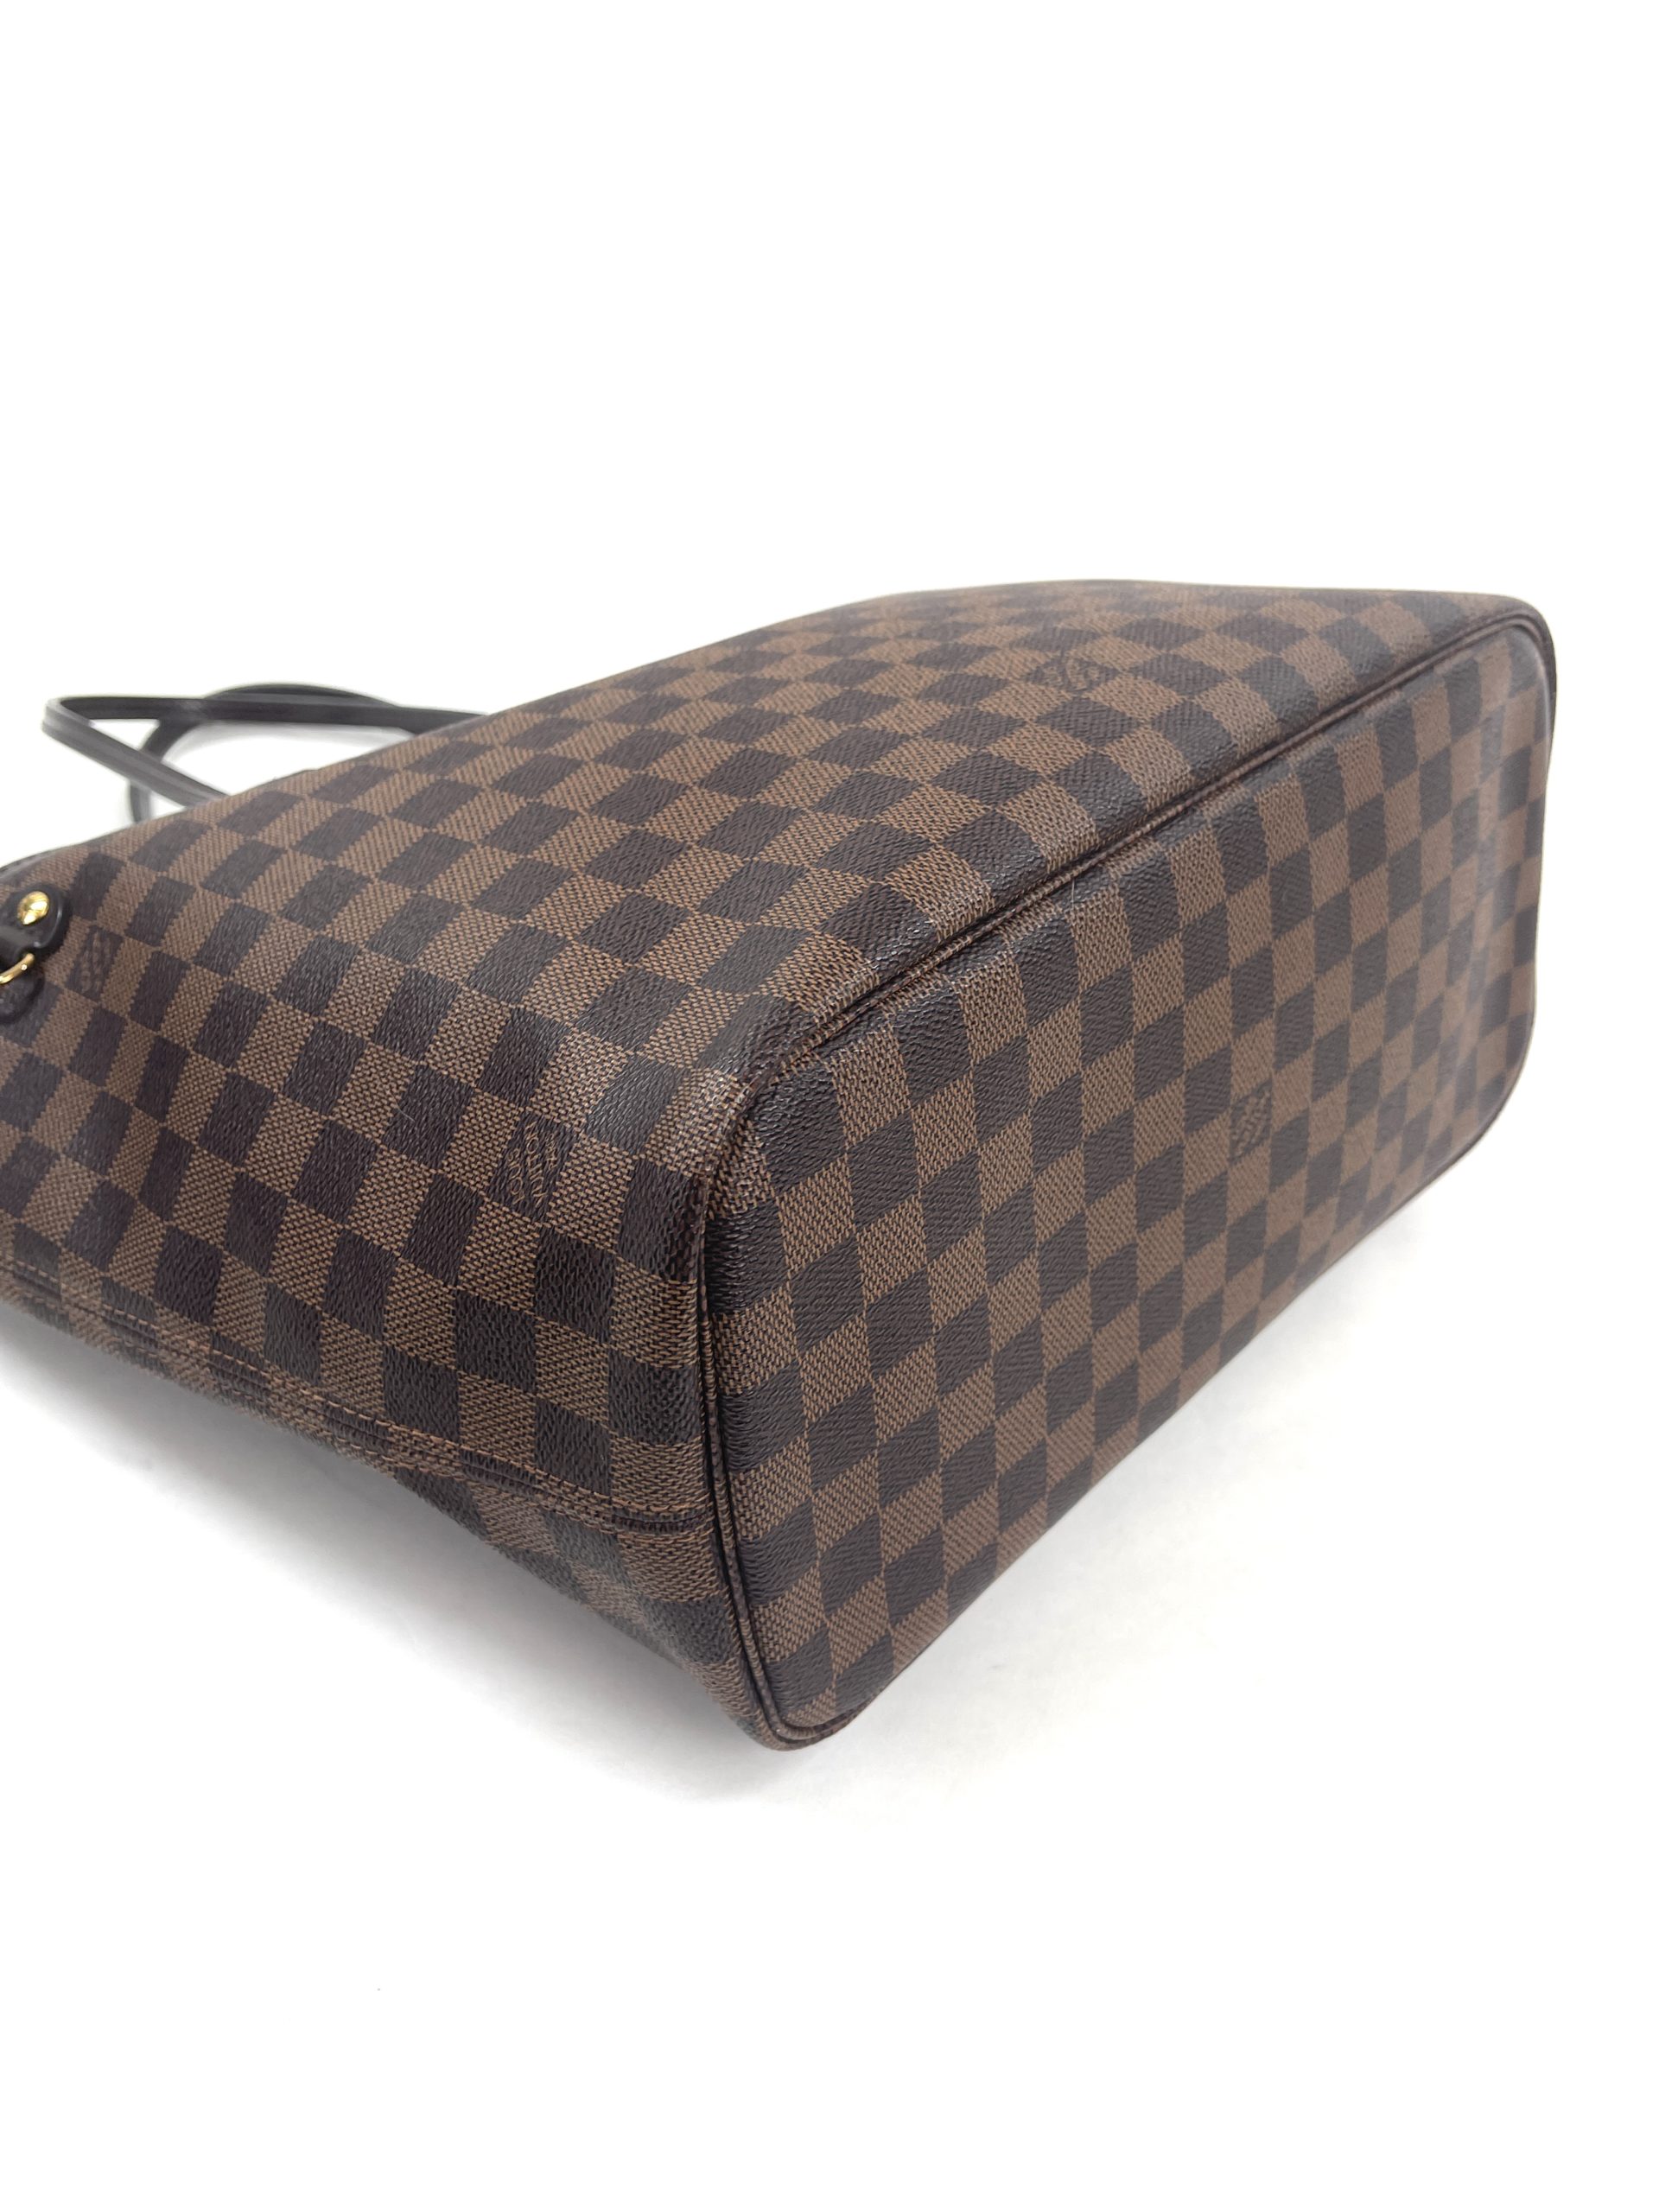 NEW! 2018 Louis Vuitton Damier Ebene Canvas Neverfull MM Tote-Clutch N41358